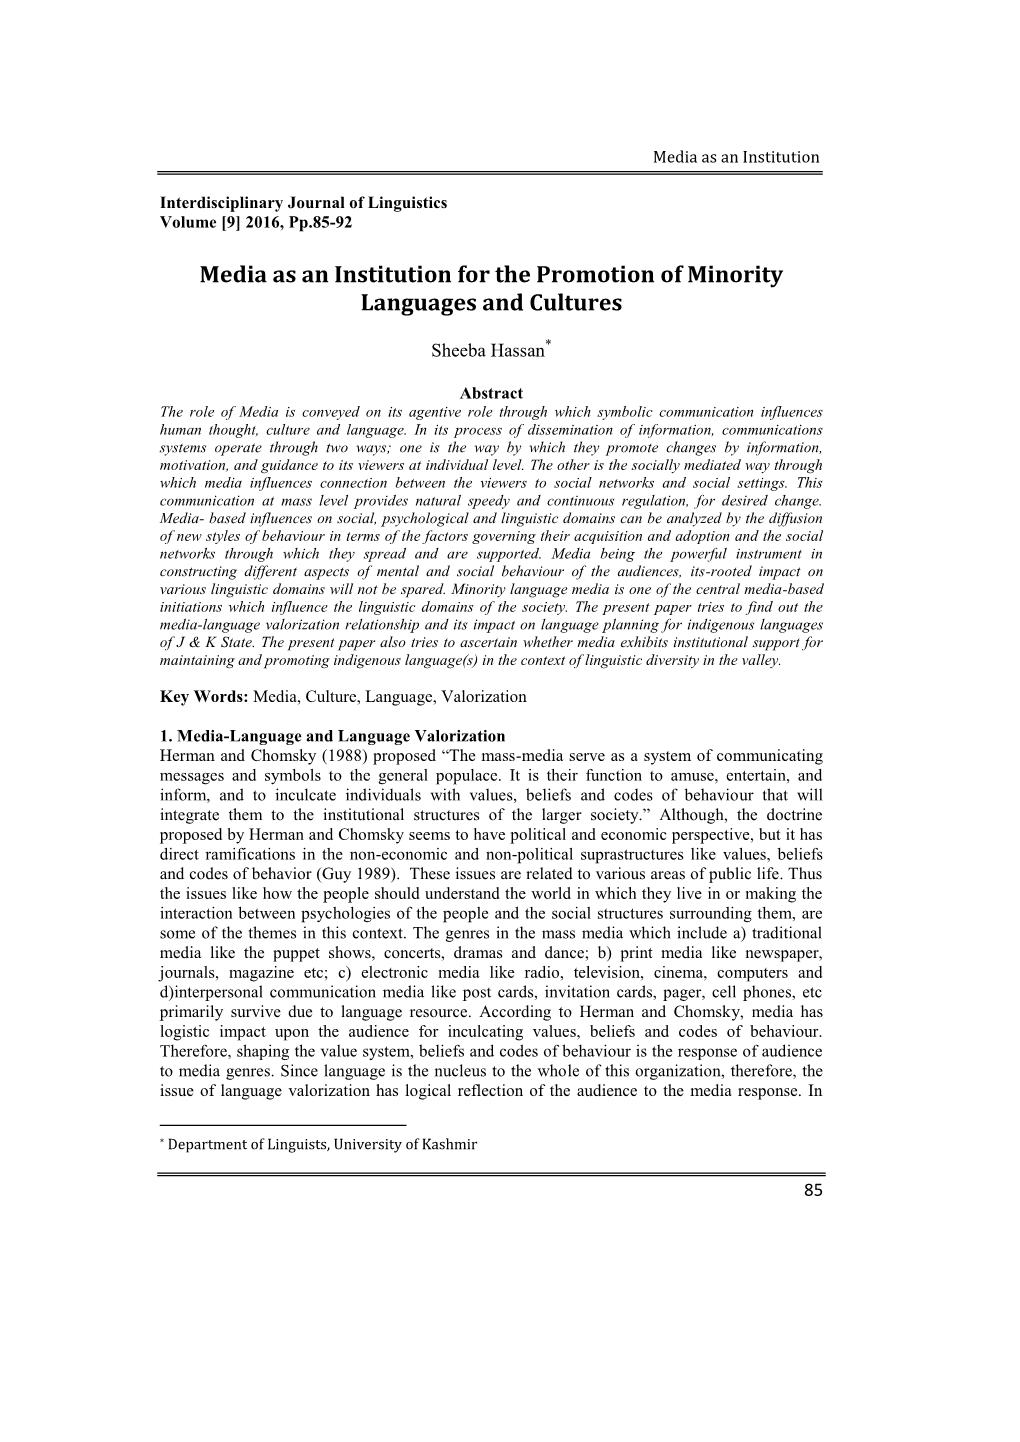 Media As an Institution for the Promotion of Minority Languages and Cultures